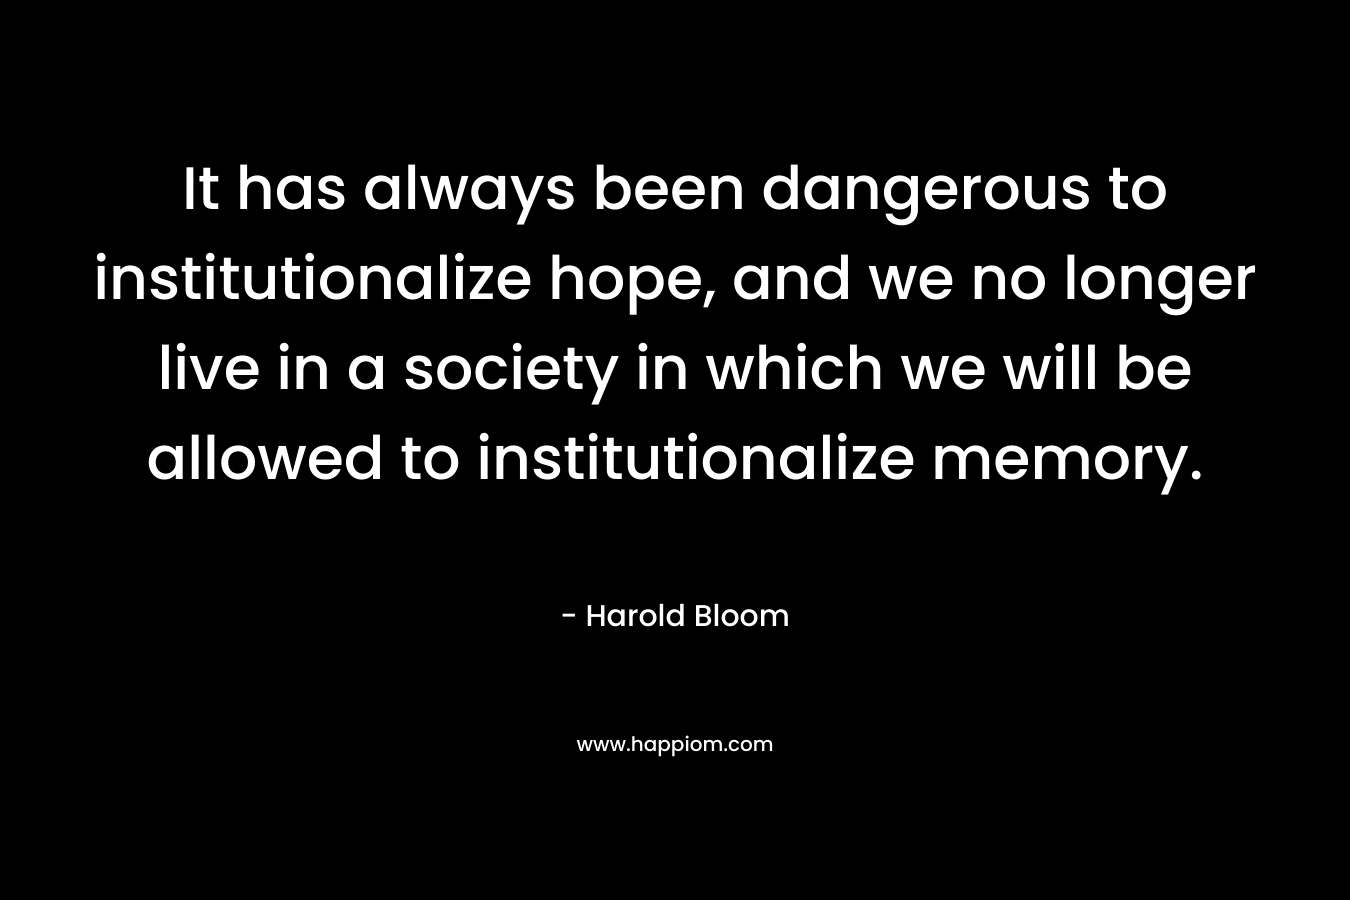 It has always been dangerous to institutionalize hope, and we no longer live in a society in which we will be allowed to institutionalize memory.